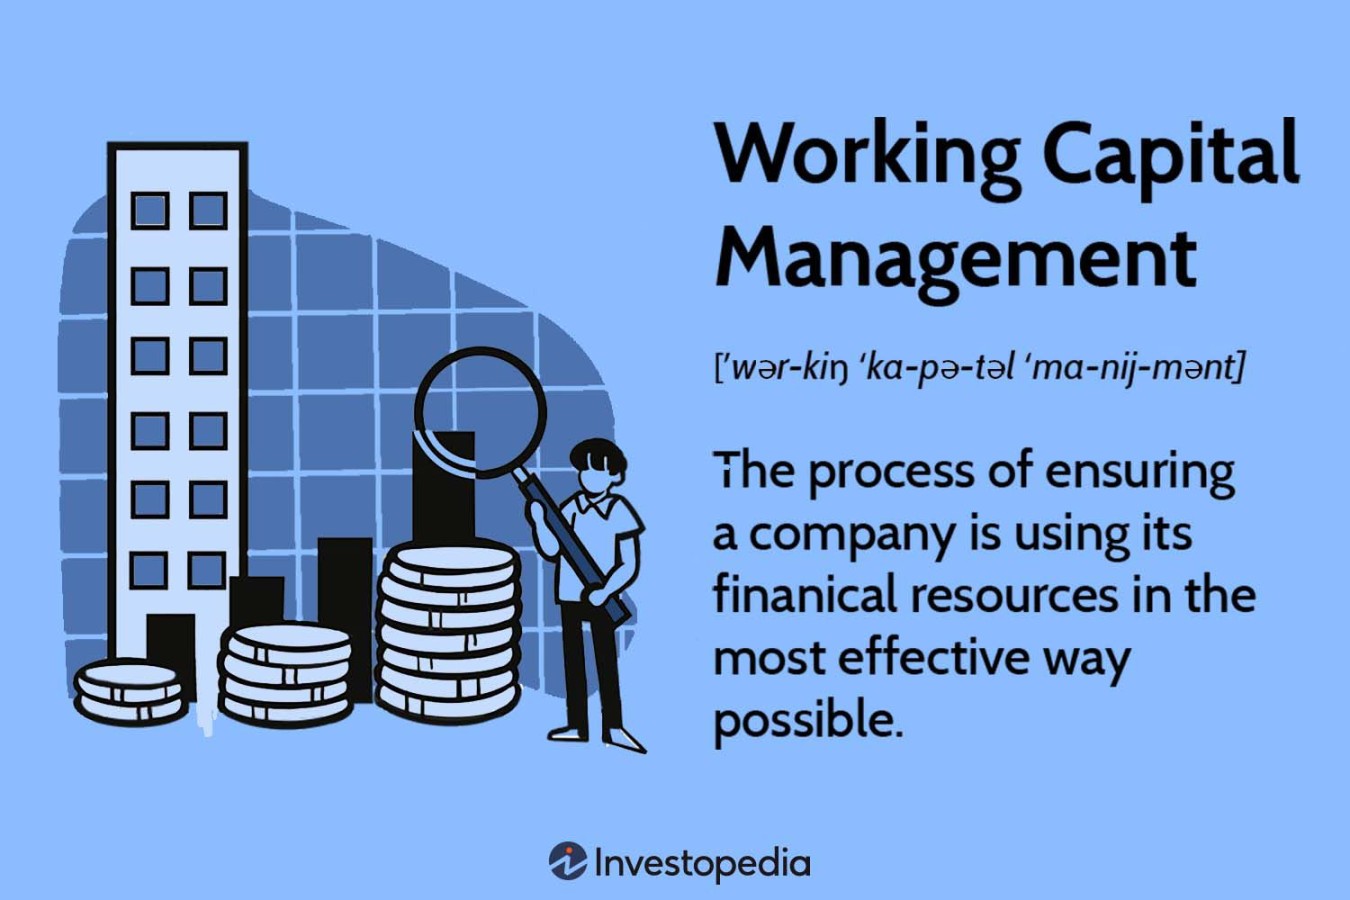 Working Capital Management Explained: How It Works